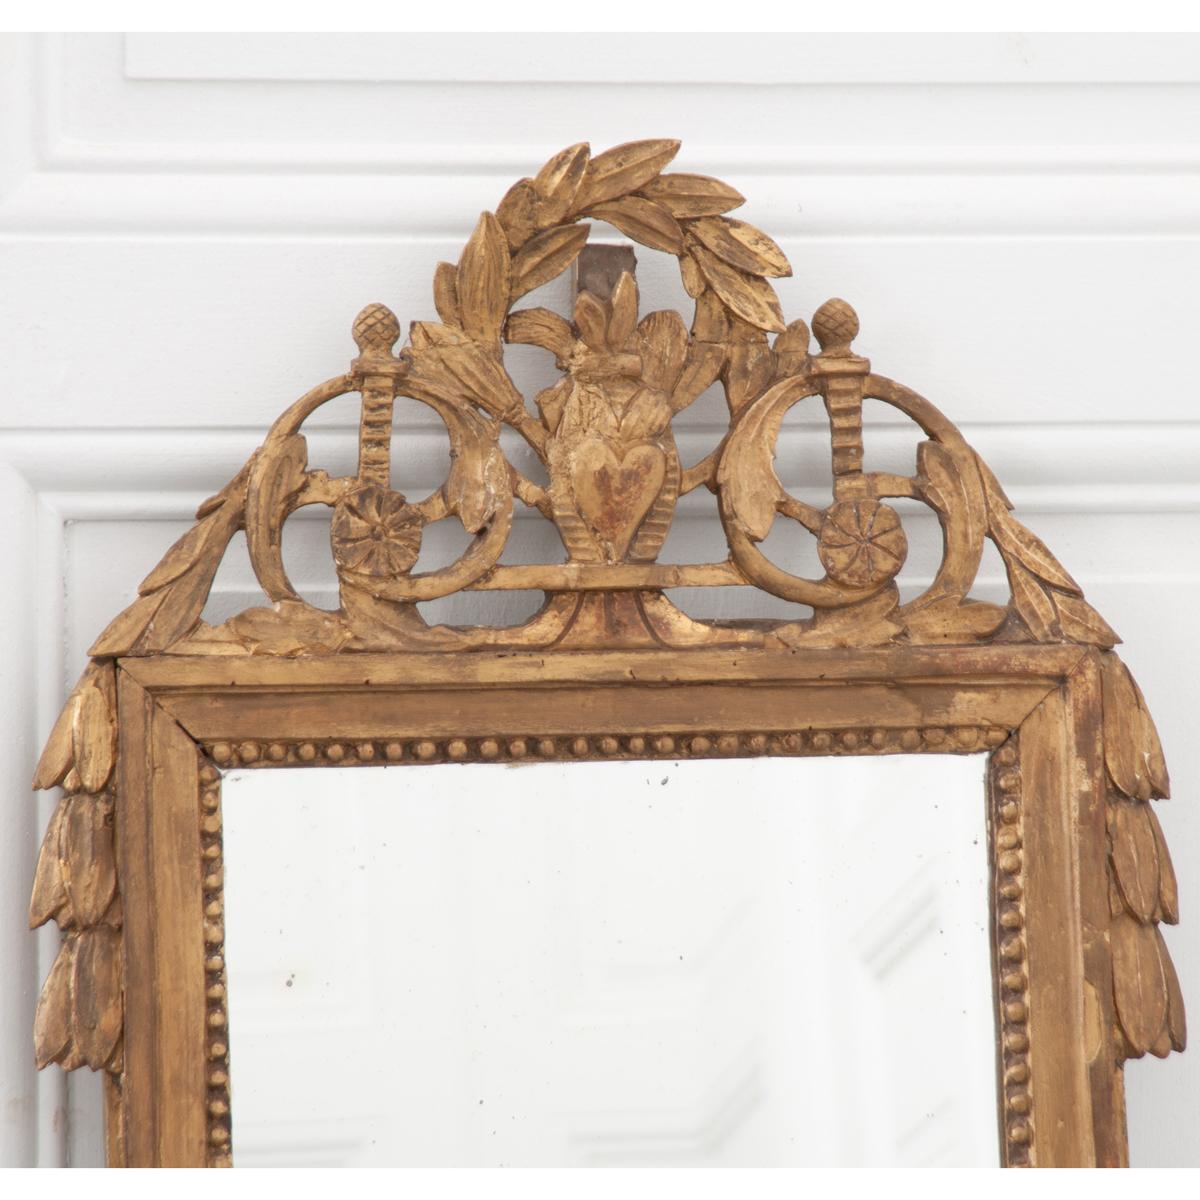 A beautifully carved petite giltwood mirror. This mirror has a wonderful crest that features a heart at its center with foliate carvings, scrolled filigree and acanthus leaves. The original glass remains intact and adds great character with some